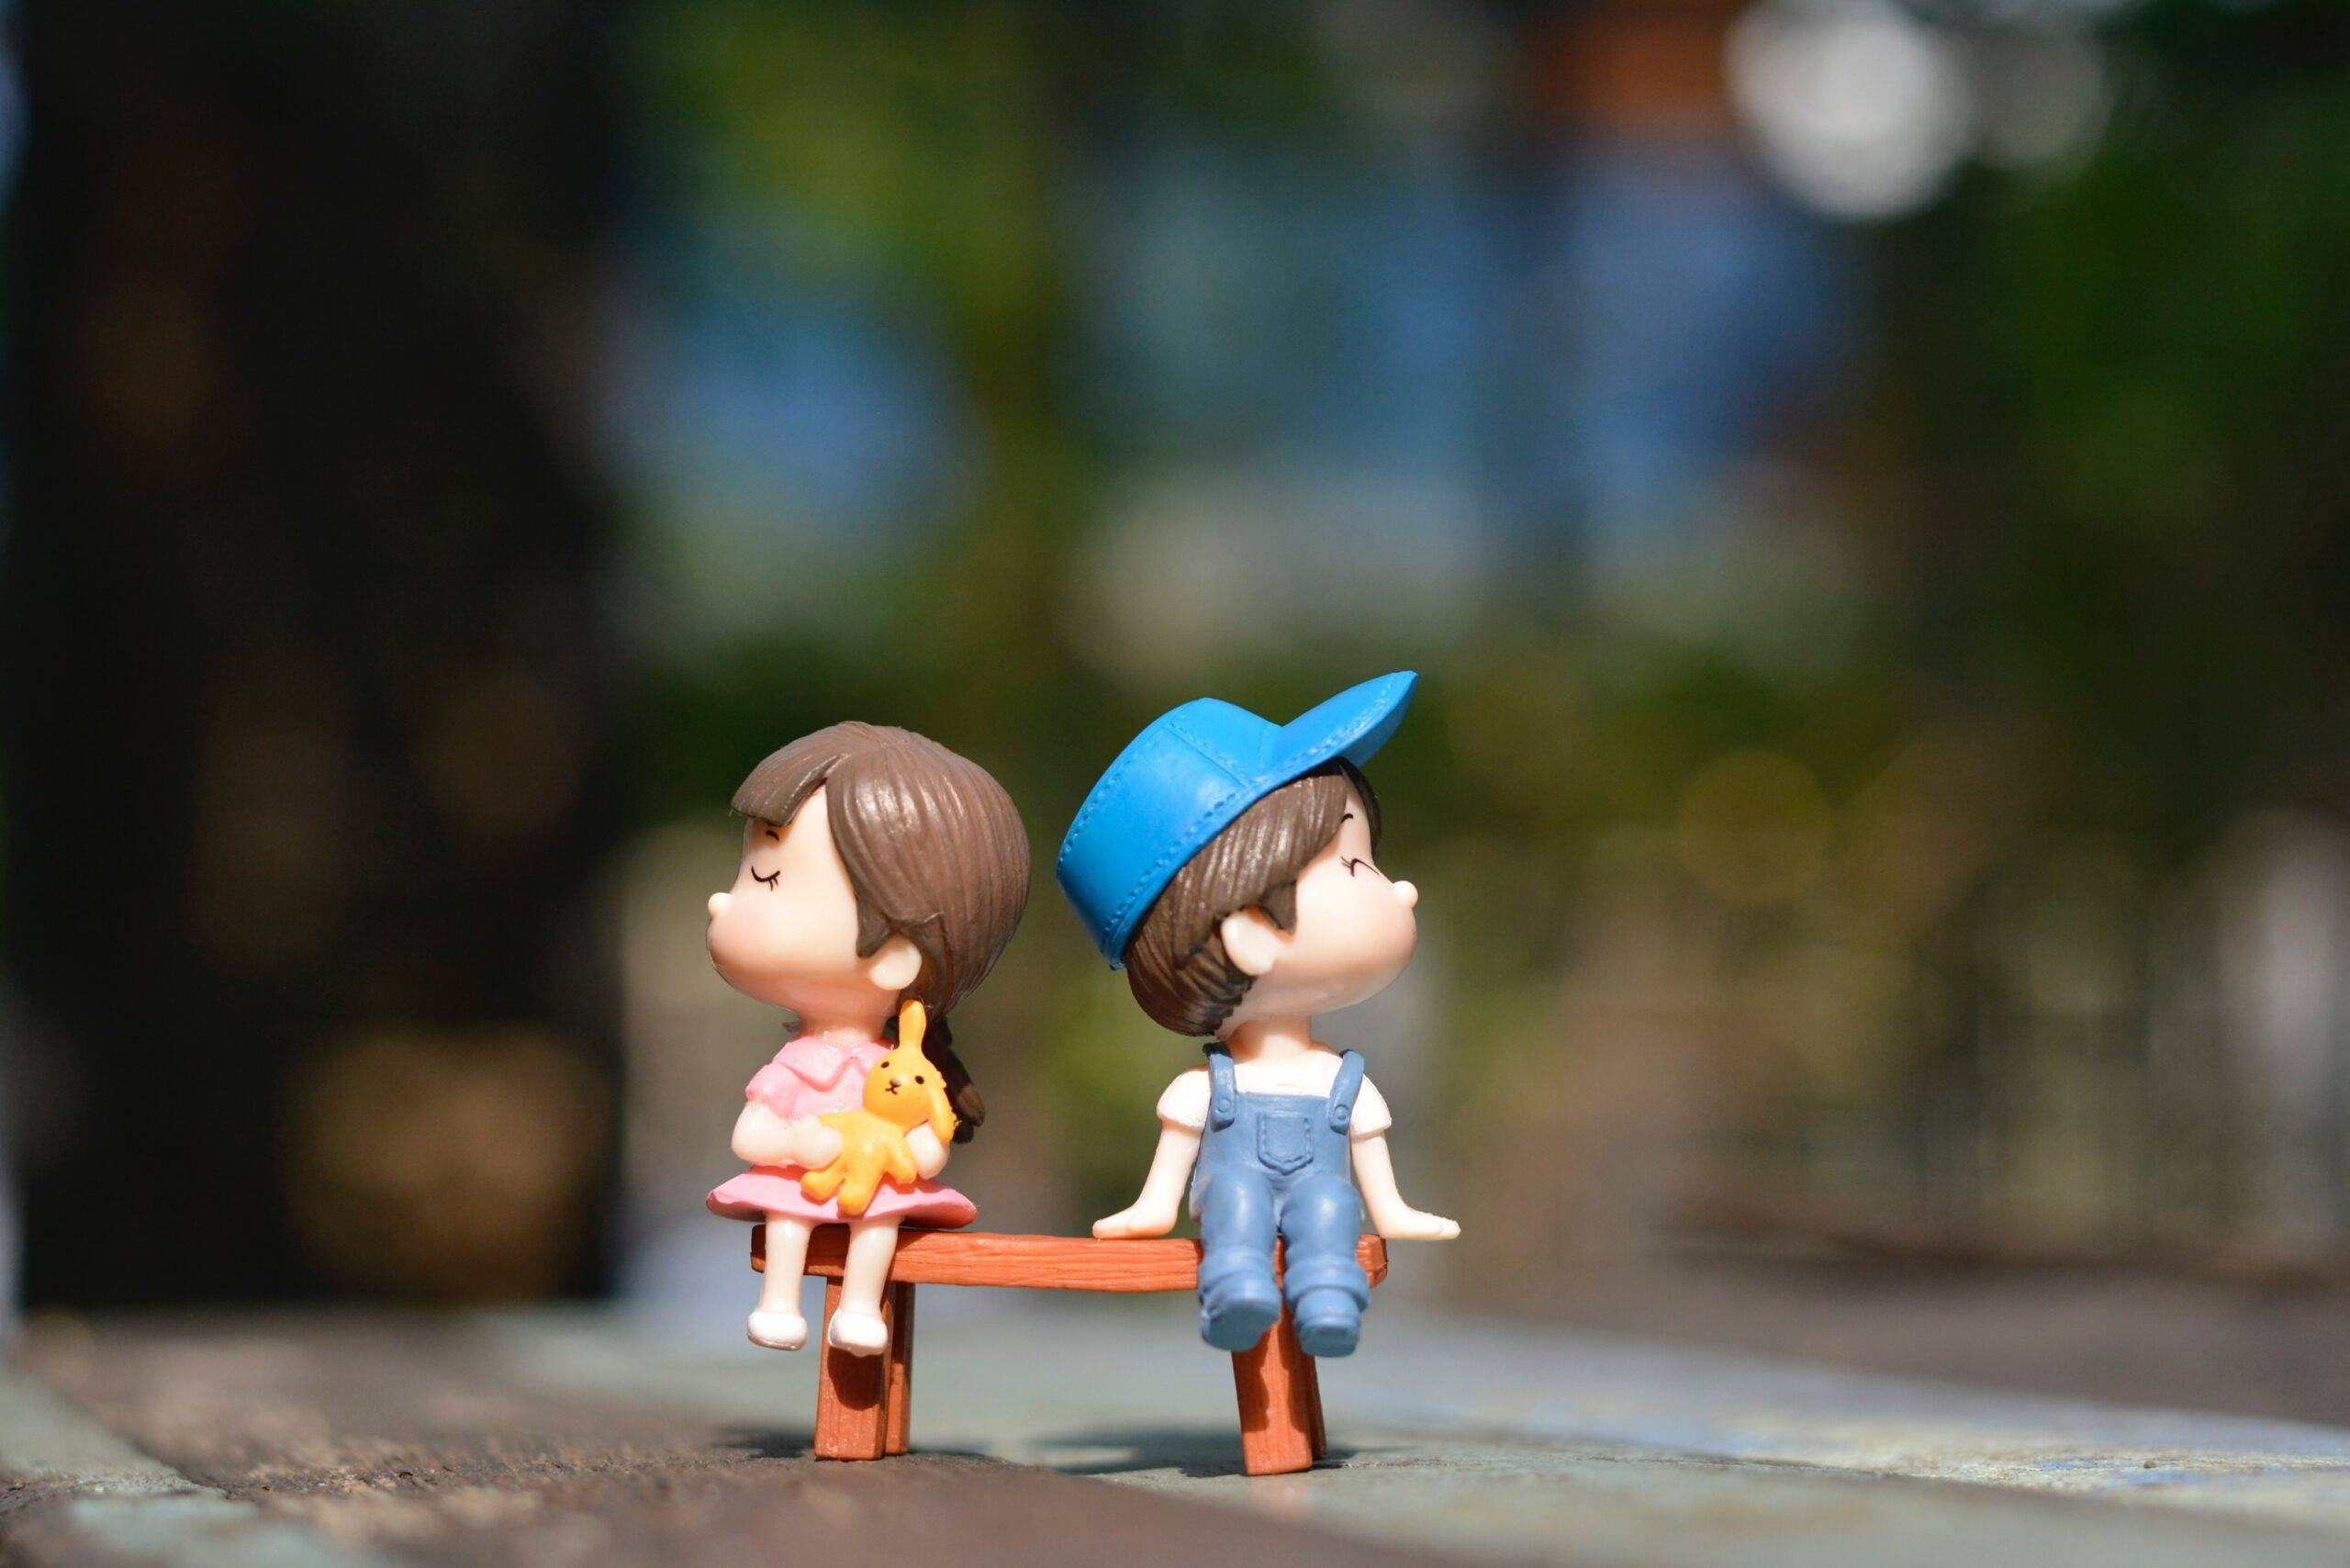 adorable-bench-blurred-background-1767434